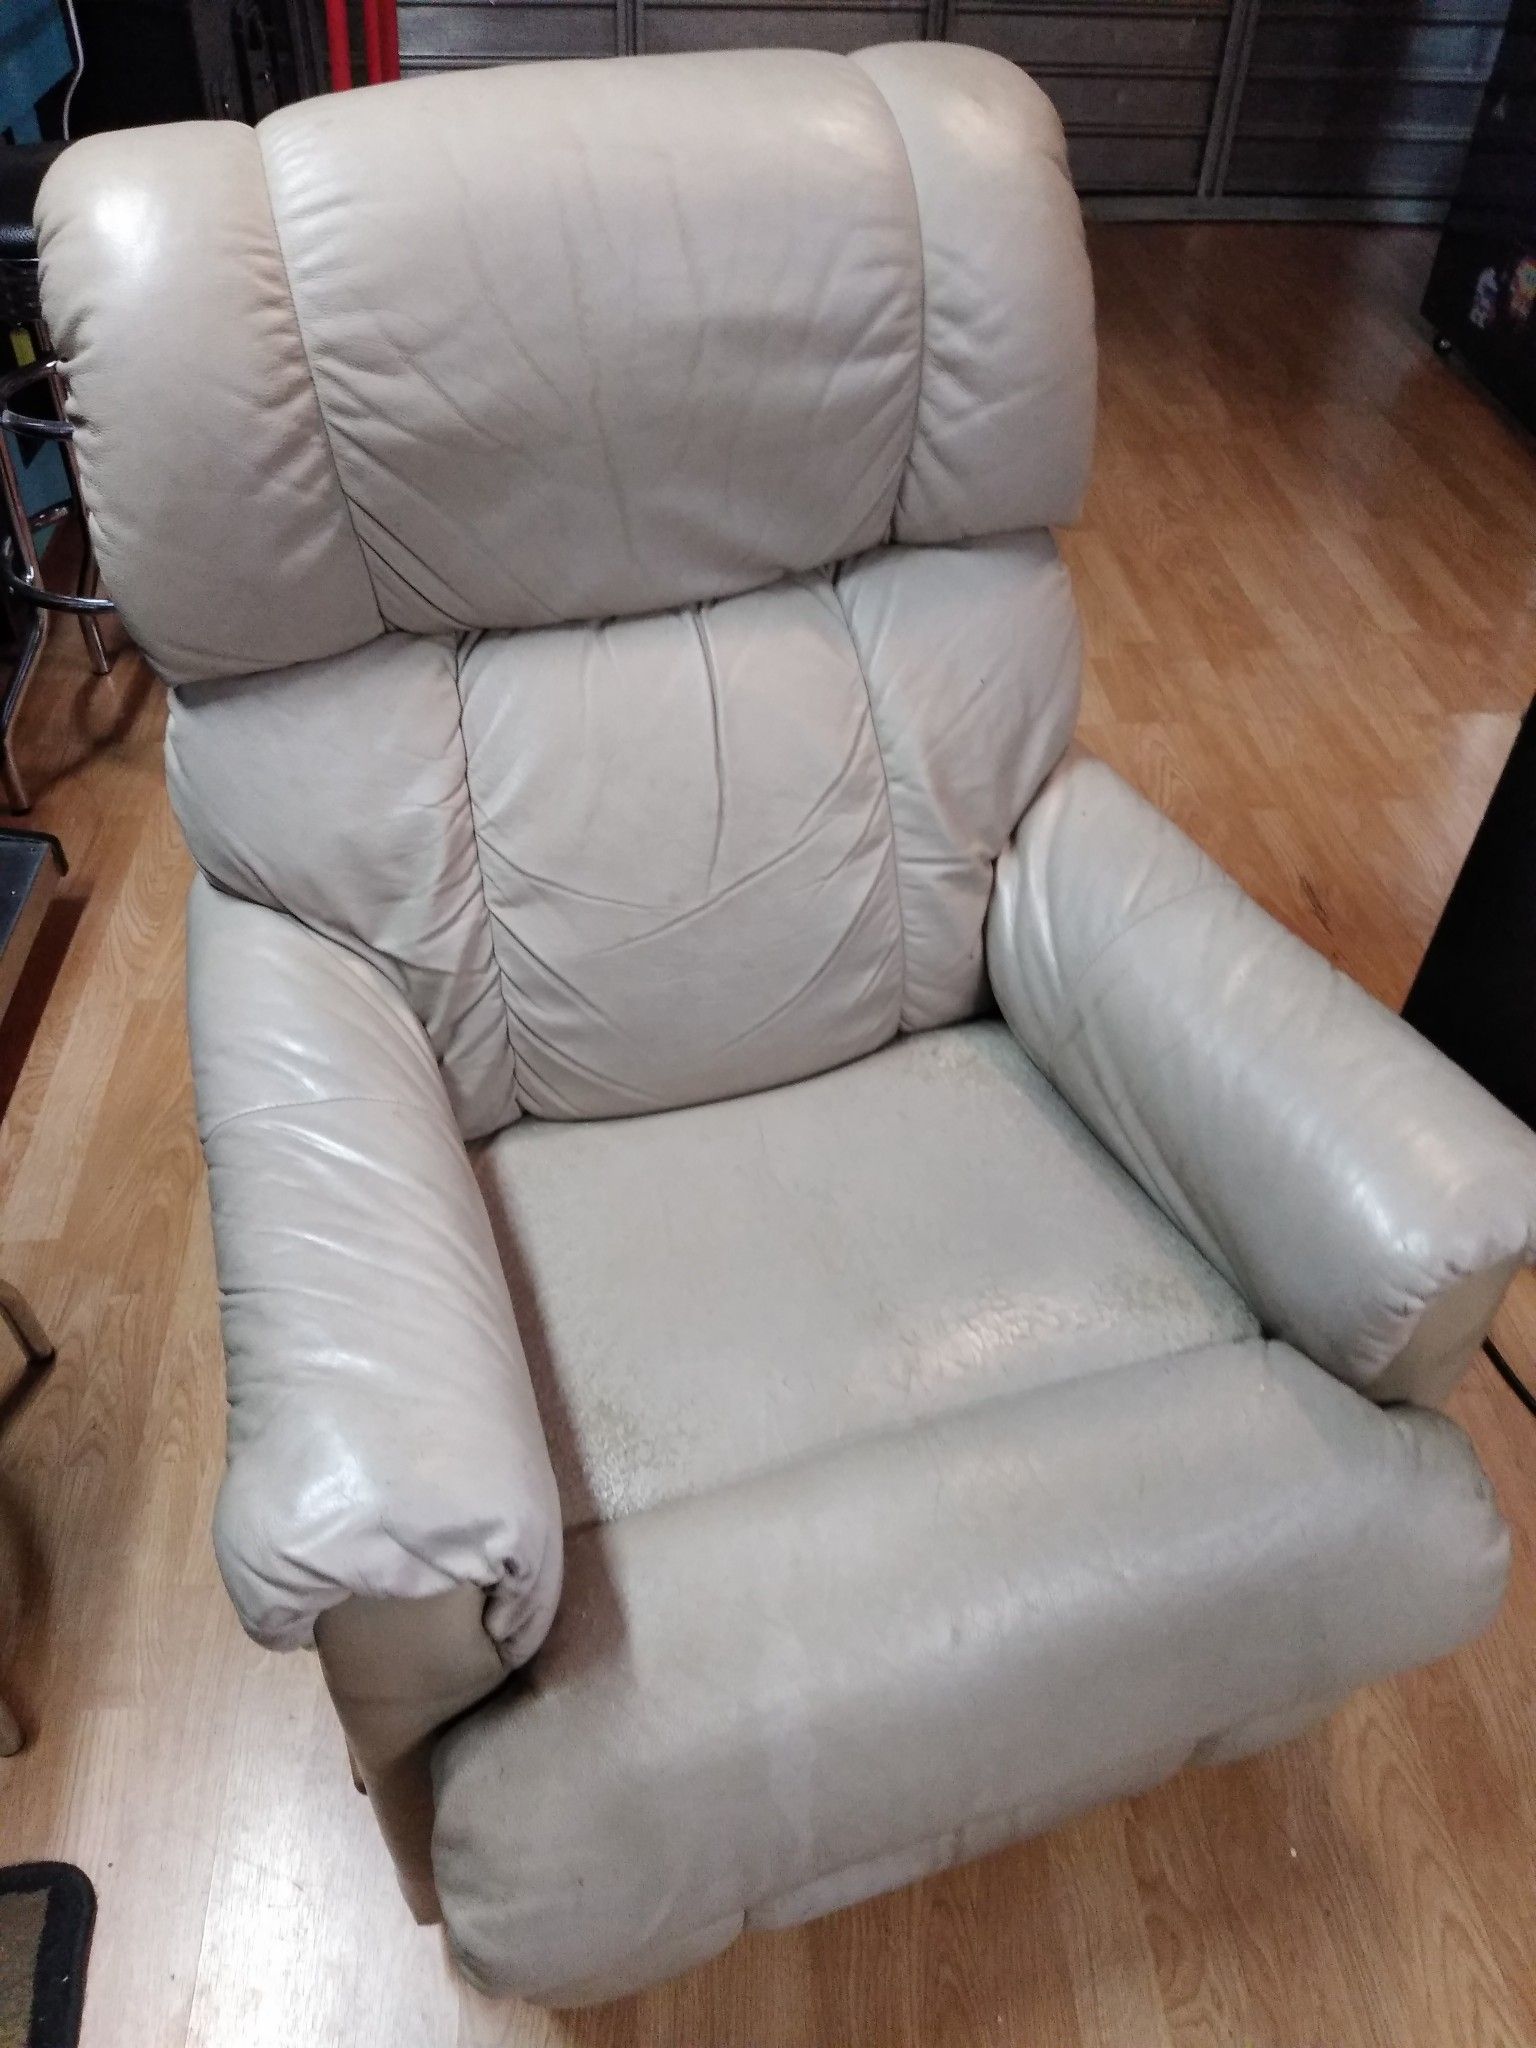 FREE LAZYBOY LEATHER ROCKER RELINER PICKUP ONLY!! BC COLLEGE AREA!